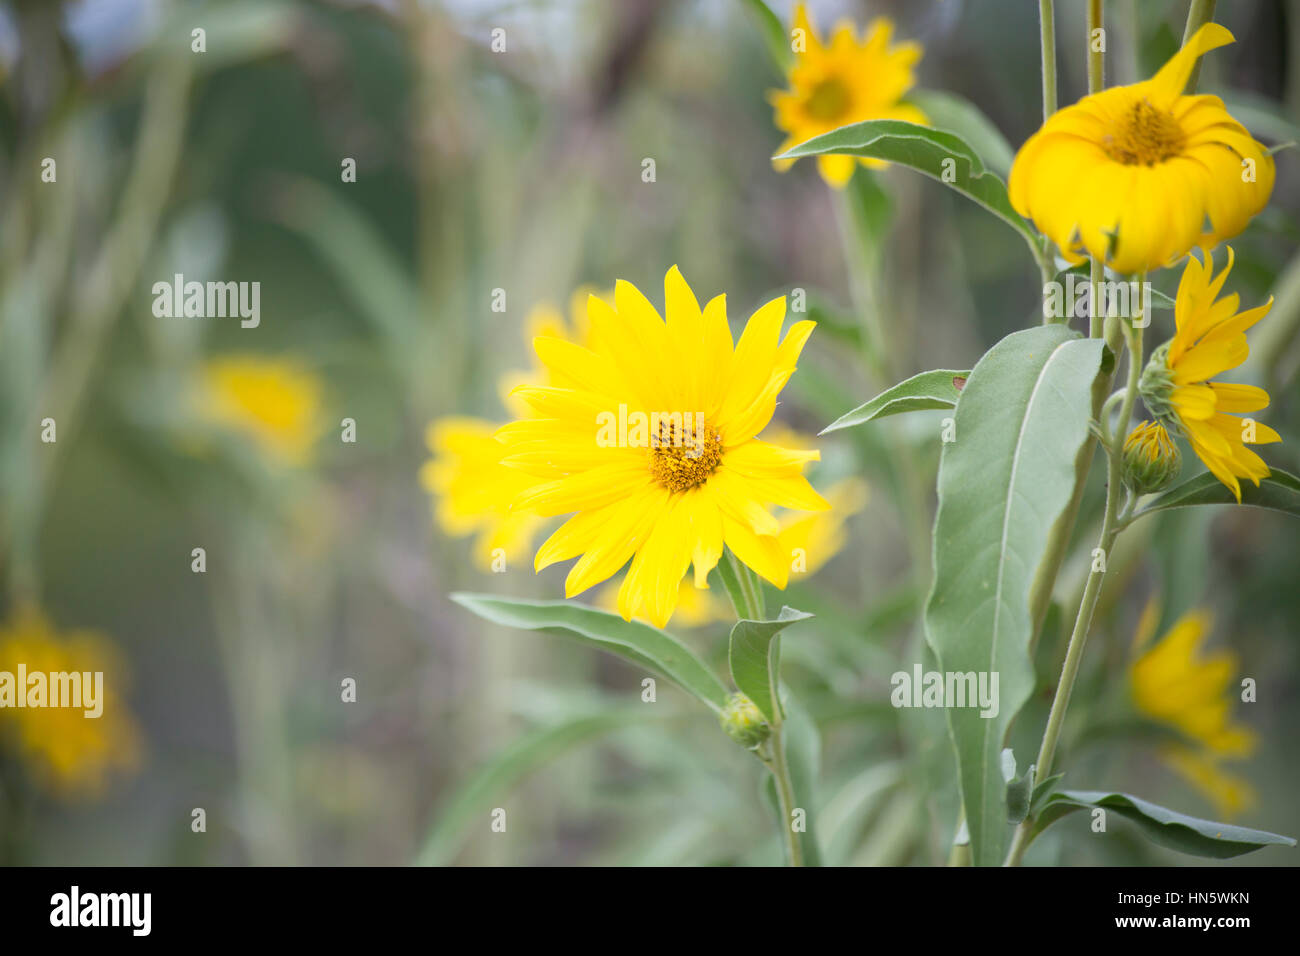 Pretty swamp sunflowers growing close together Stock Photo - Alamy